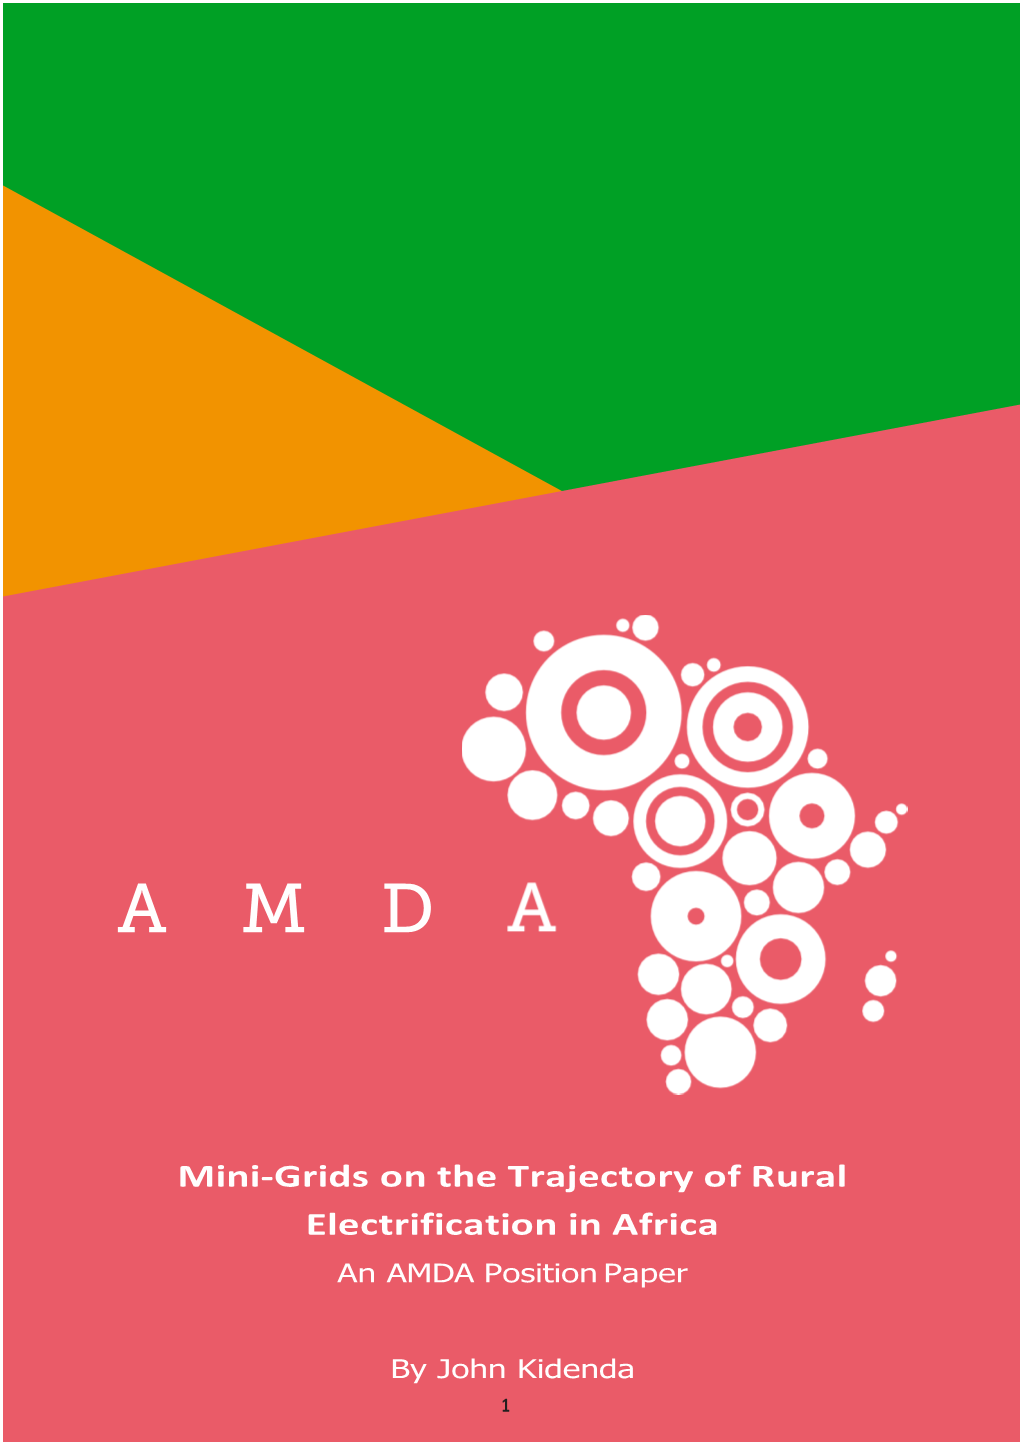 Mini-Grids on the Trajectory of Rural Electrification in Africa